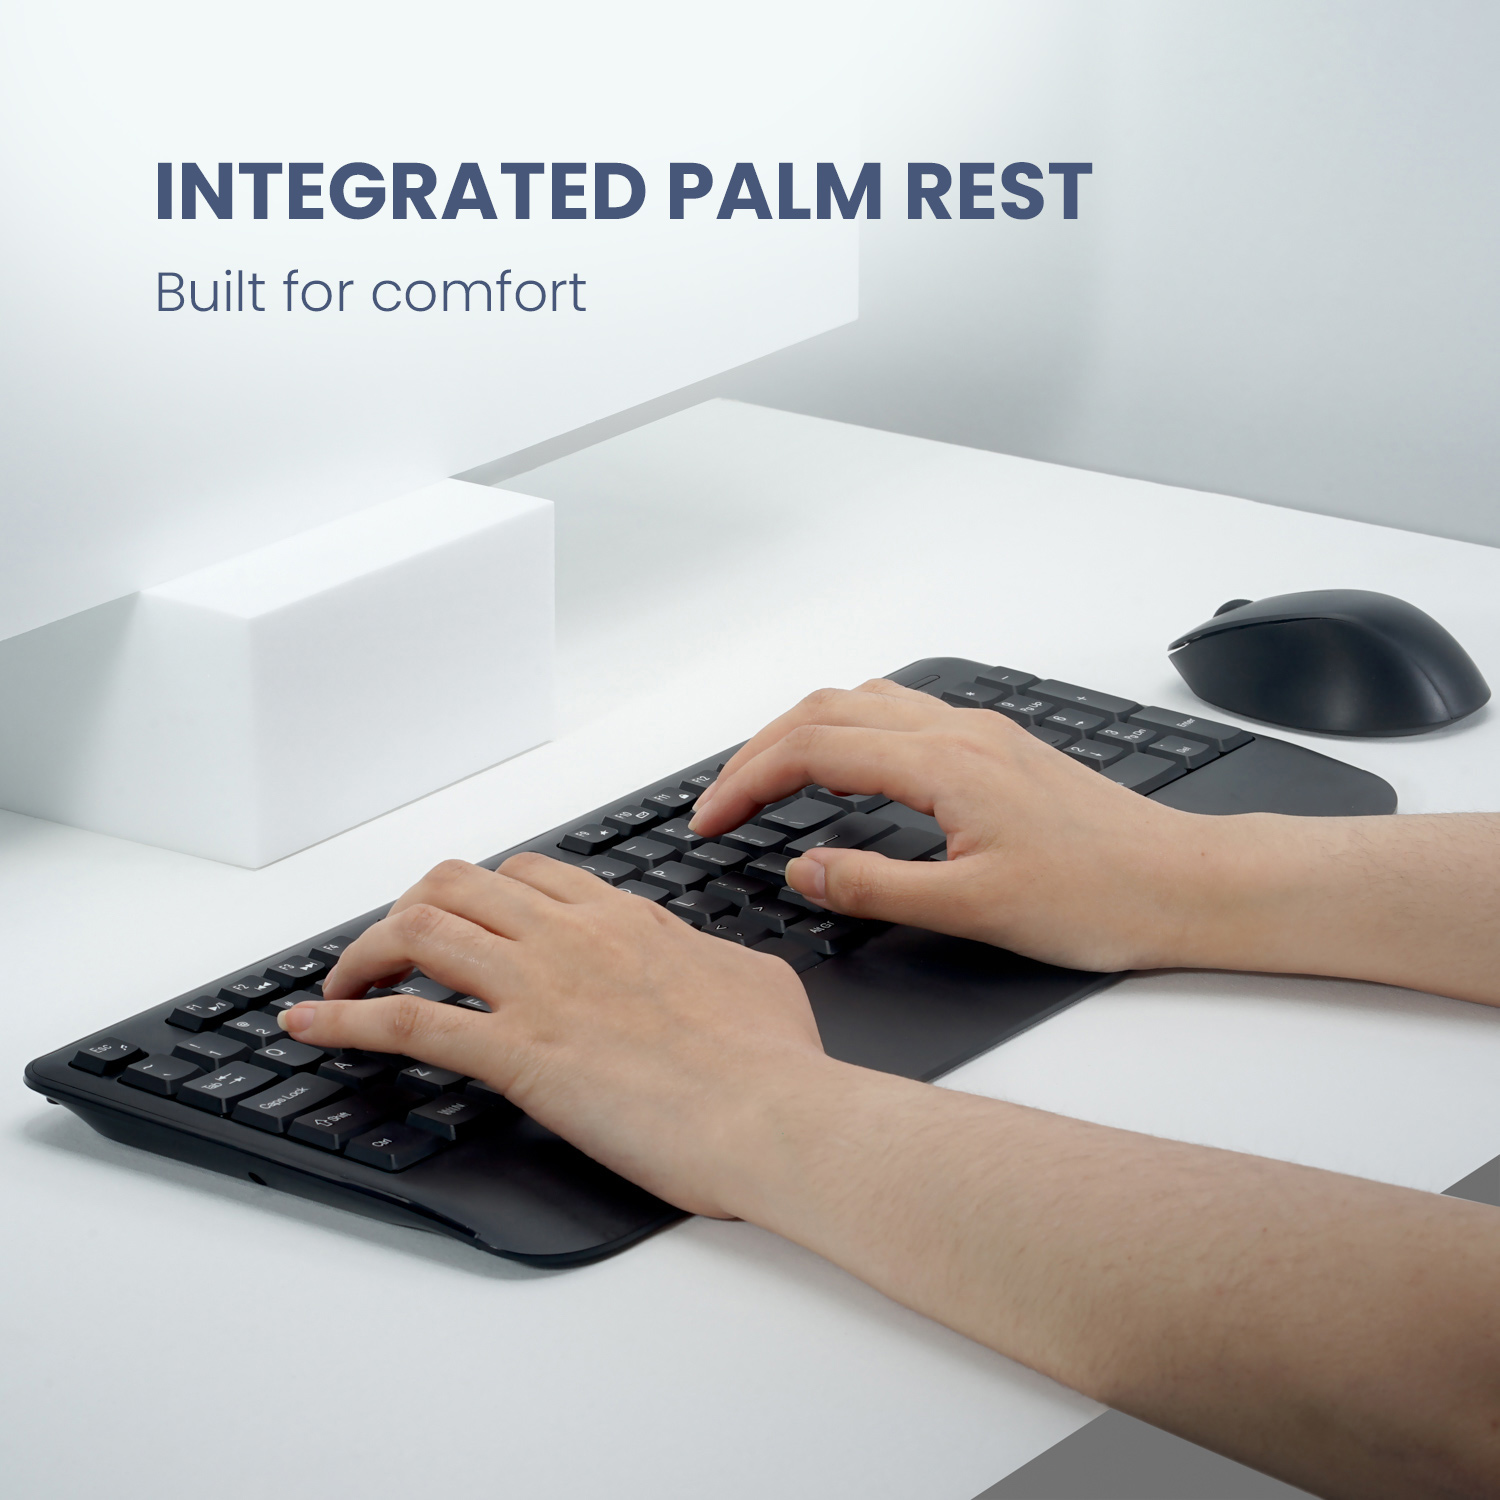  INTEGRATED PALM REST